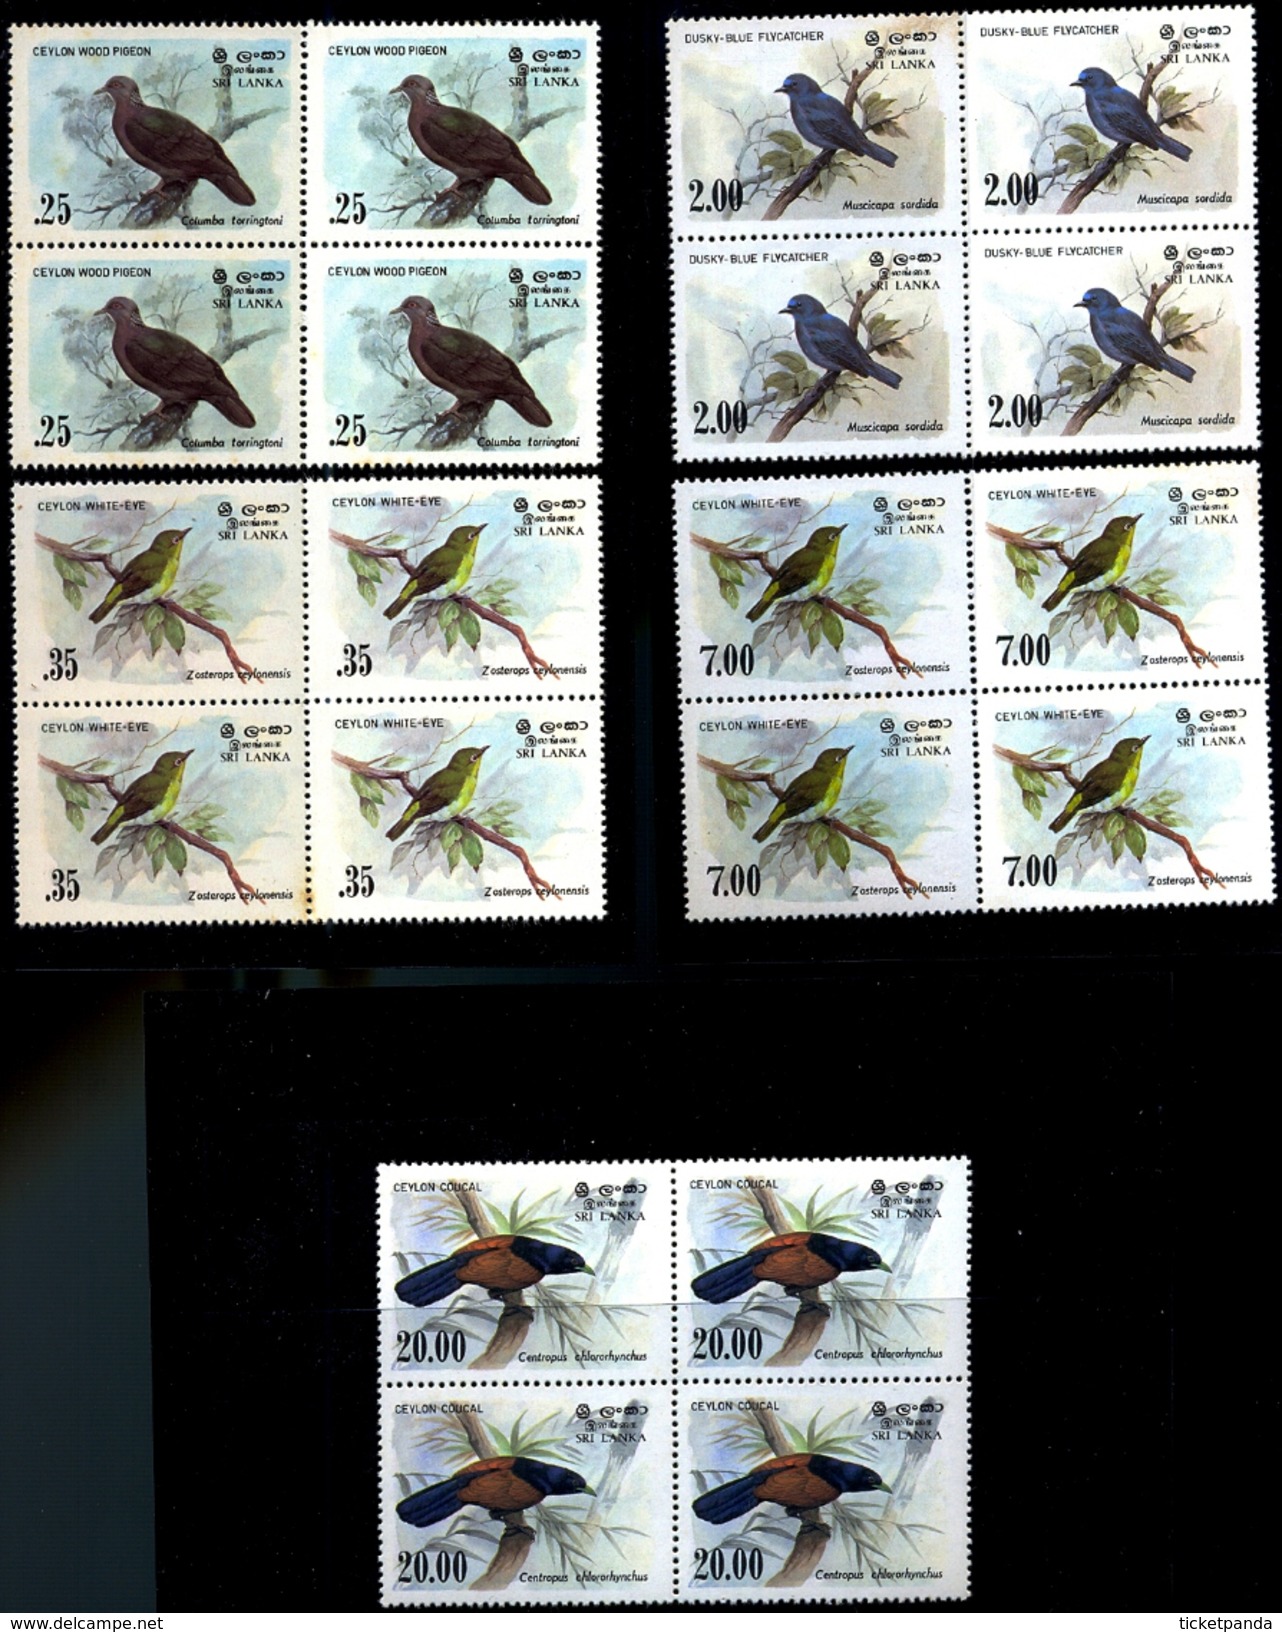 BIRDS OF CEYLON WOOD PIGEON, WHITE EYE, FLYCATCHER& COUCAL-SET OF 5 IN BLOCKS OF 4-MNH-H1-201 - Coucous, Touracos